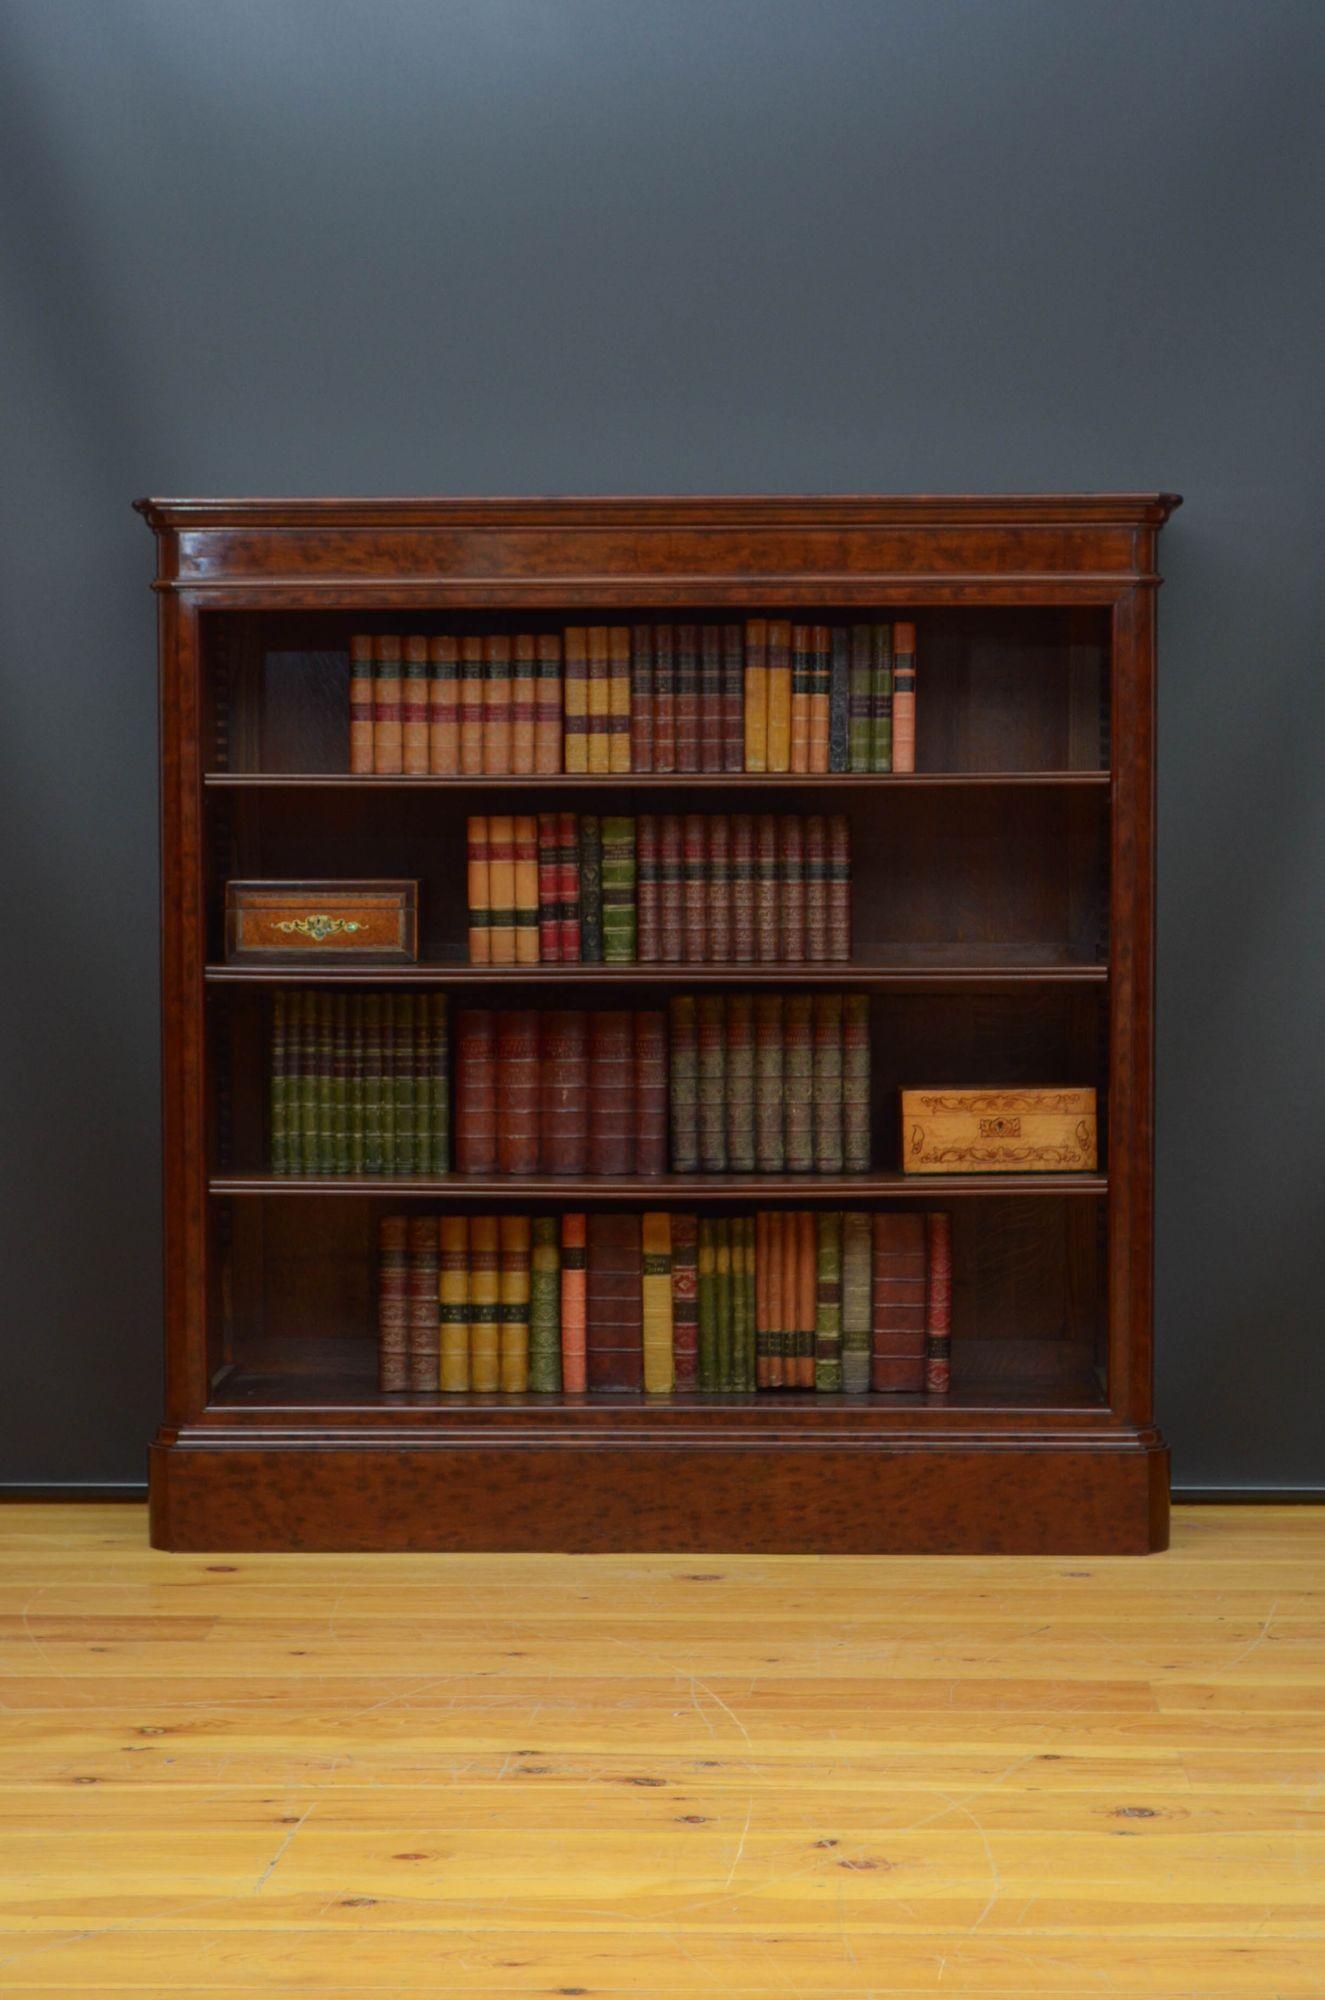 Sn5410 Superb quality XIXth century open bookcase in plum pudding mahogany, having oversailing top with outstanding mahogany grain above three height adjustable shelves flanked by rounded corners, all standing on moulded plinth base. This antique